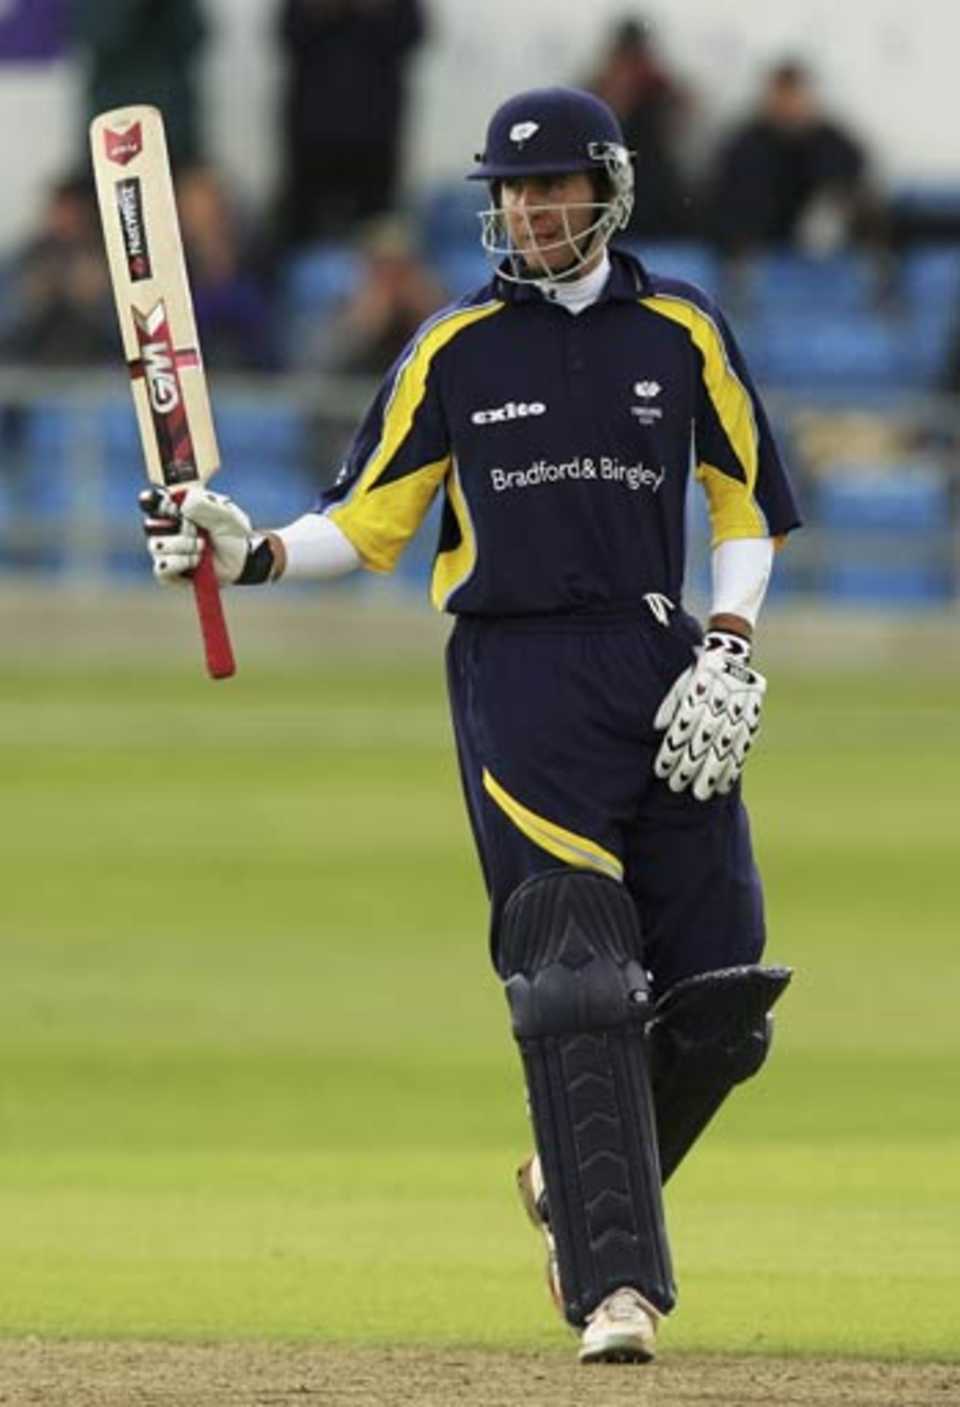 Michael Vaughan celebrates his fifty against Scotland, in his comeback match for Yorkshire, Yorkshire v Scotland, C&G Trophy, Headingley, May 29, 2006